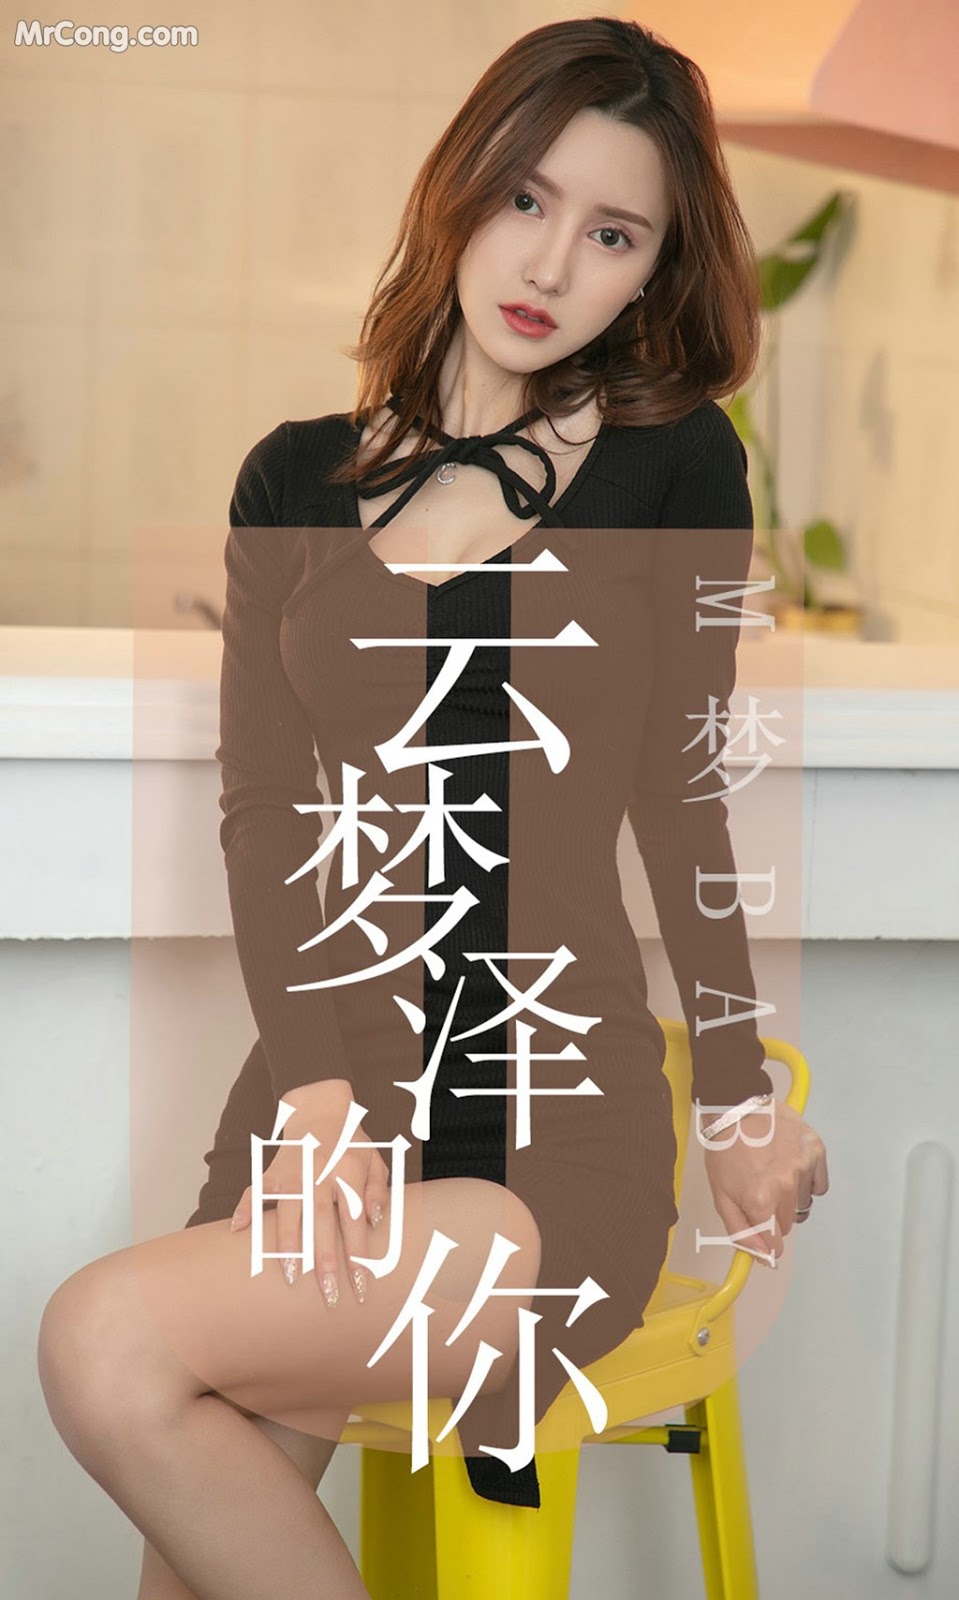 UGIRLS - Ai You Wu App No.1491: M 梦 baby (35 pictures) photo 1-0